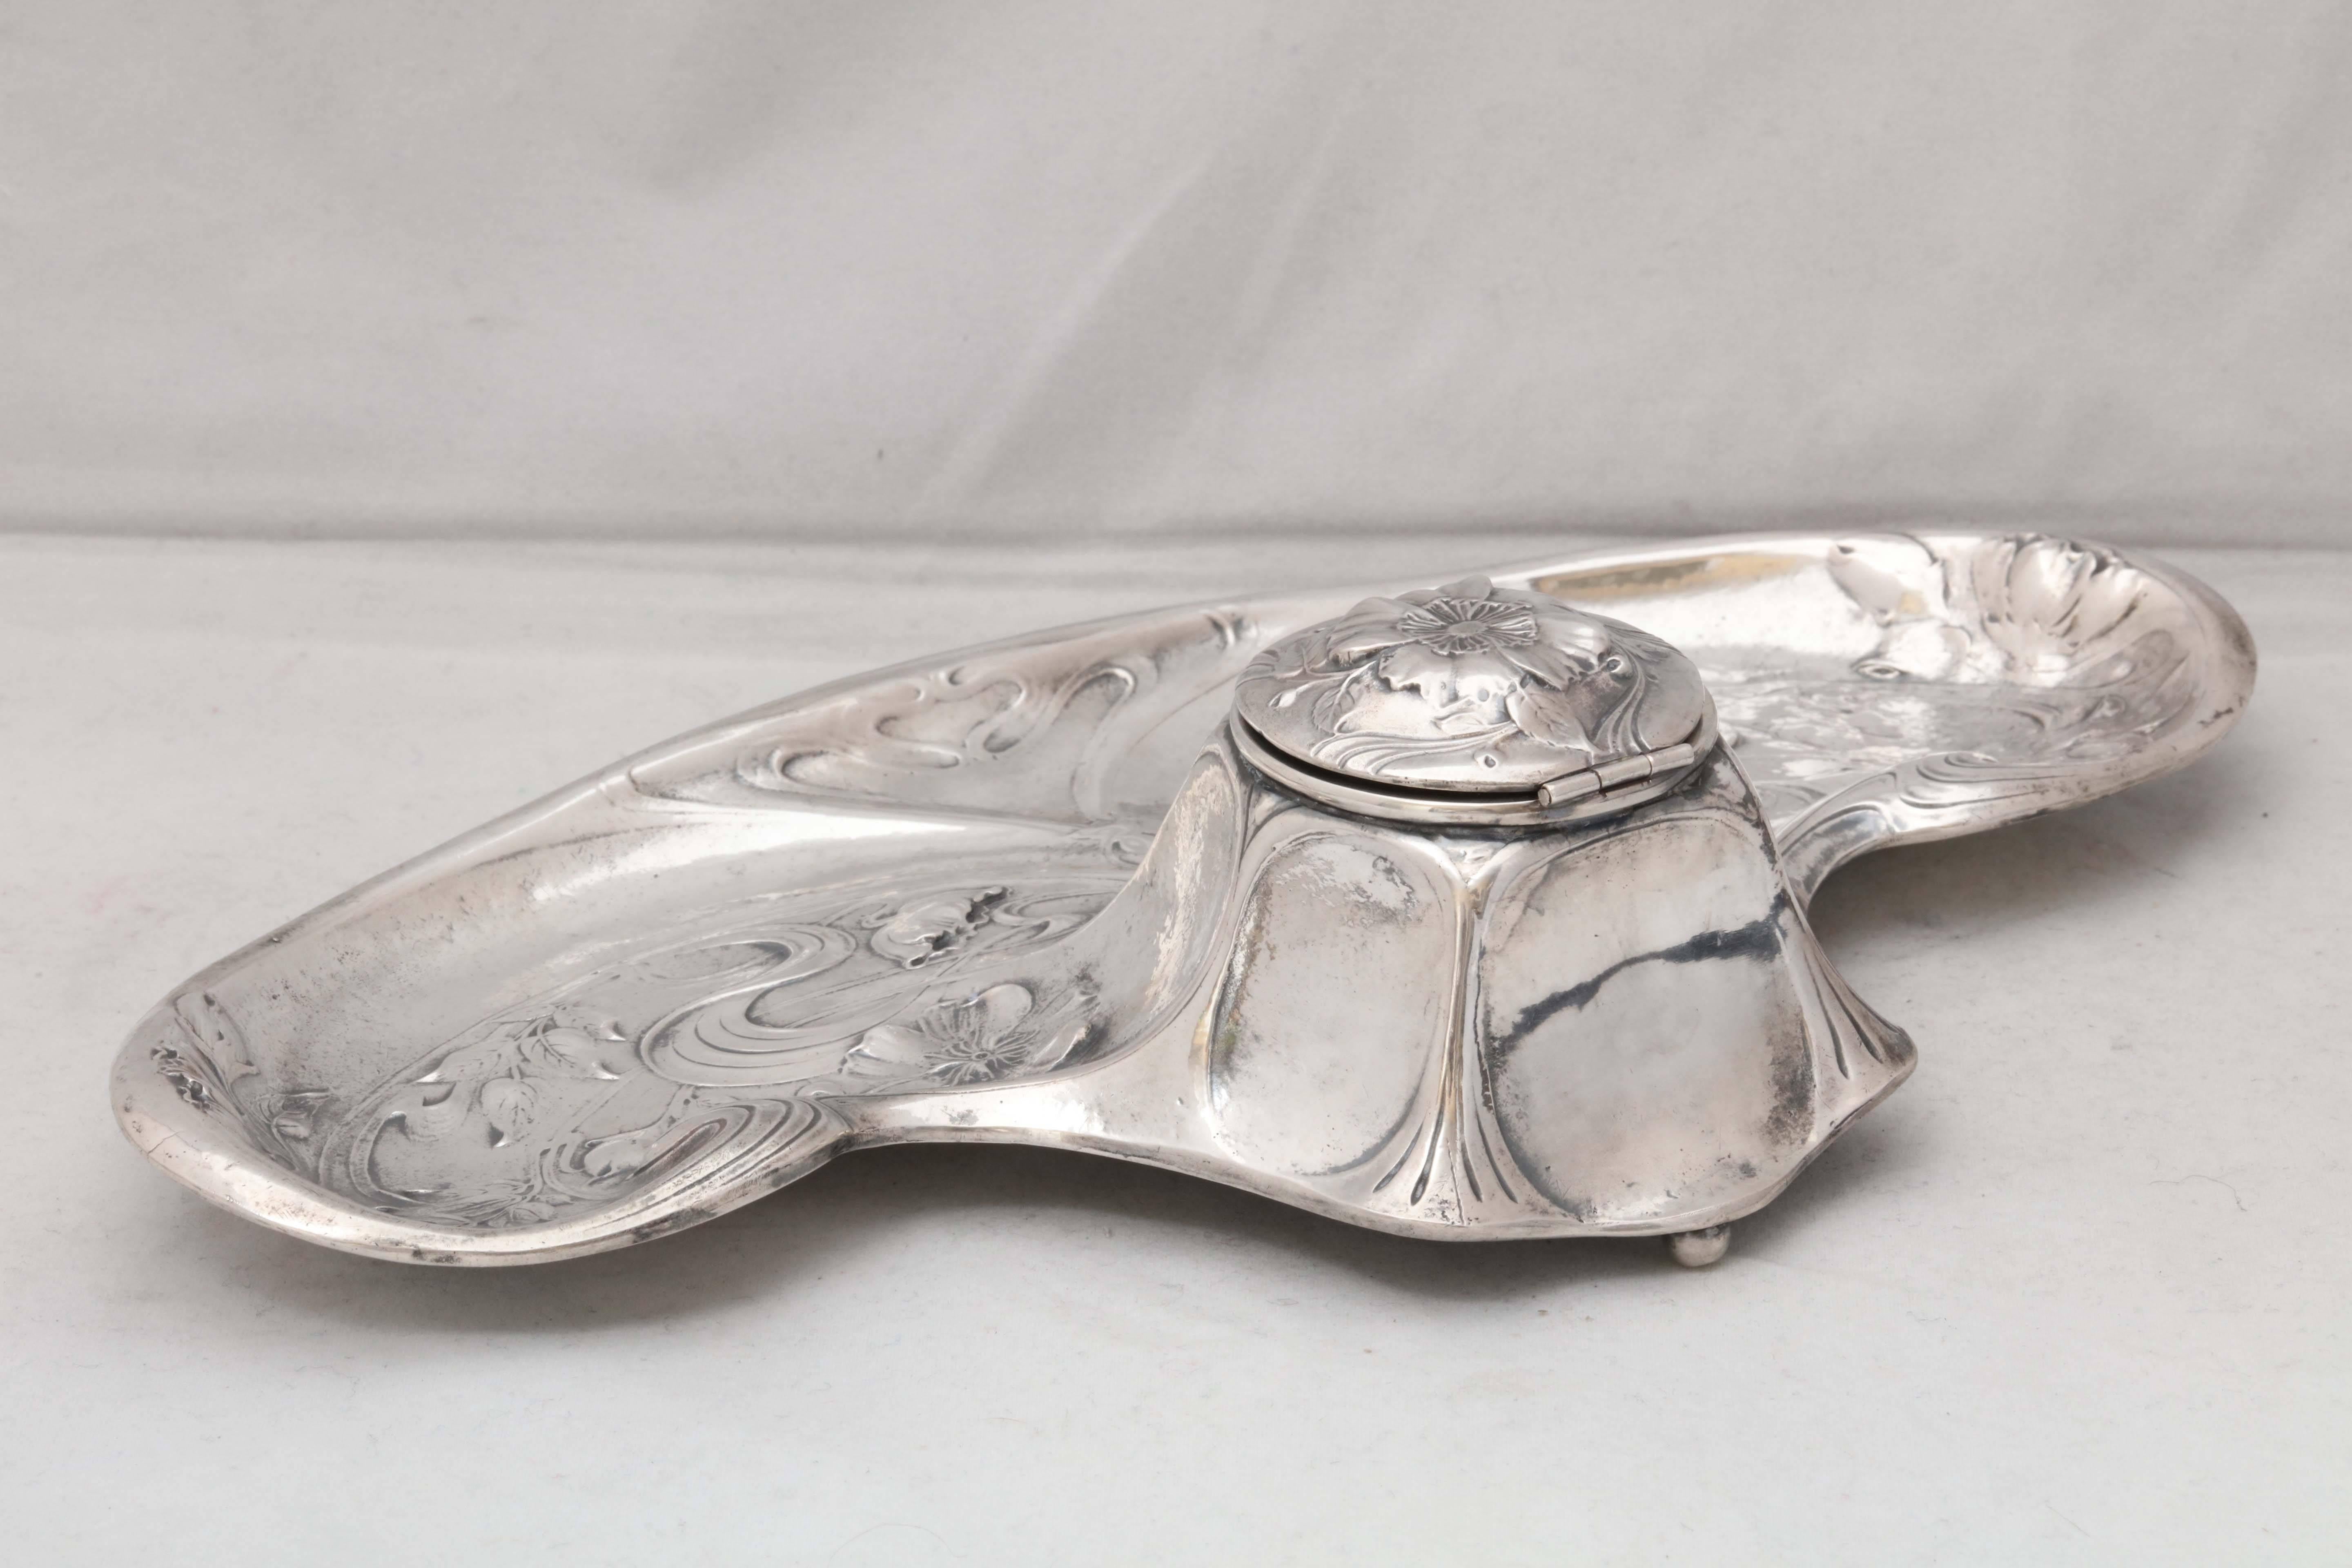 Rare Sterling Silver Art Nouveau Gorham Martele Footed Inkstand with Hinged Lid For Sale 1